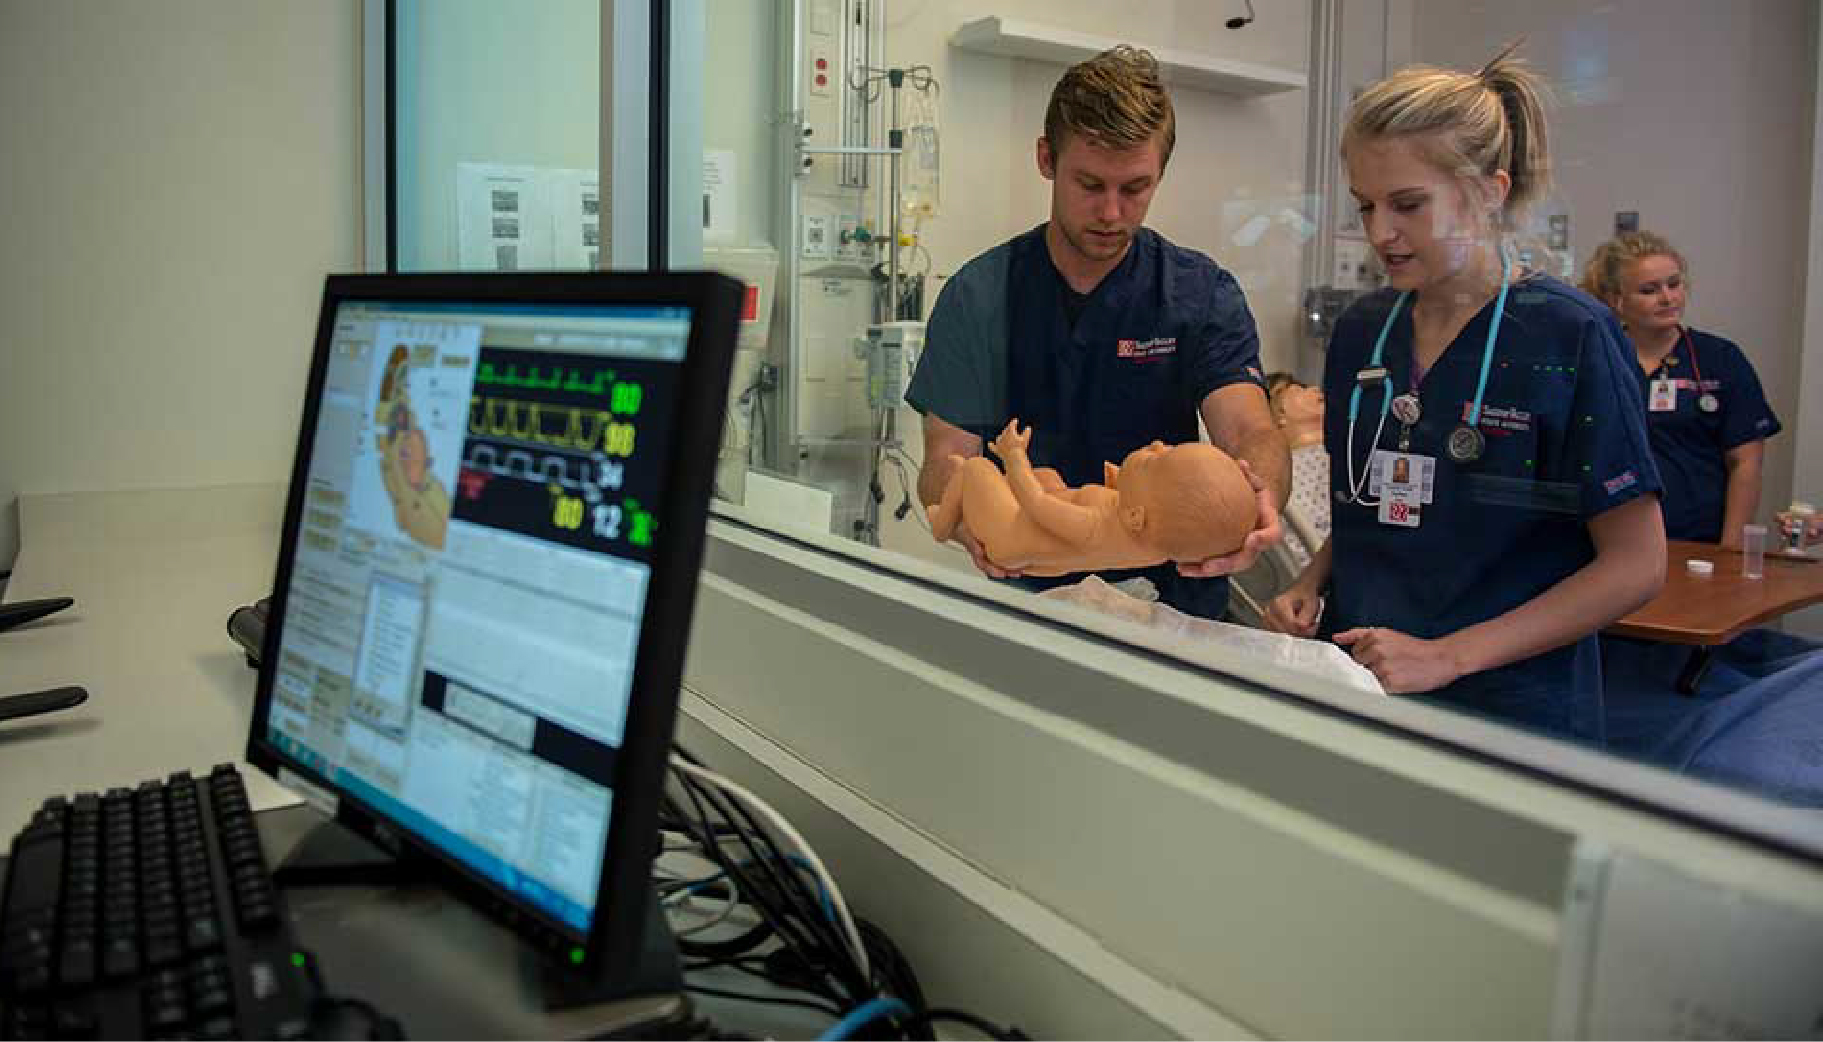 Nursing students being monitored in a simulation